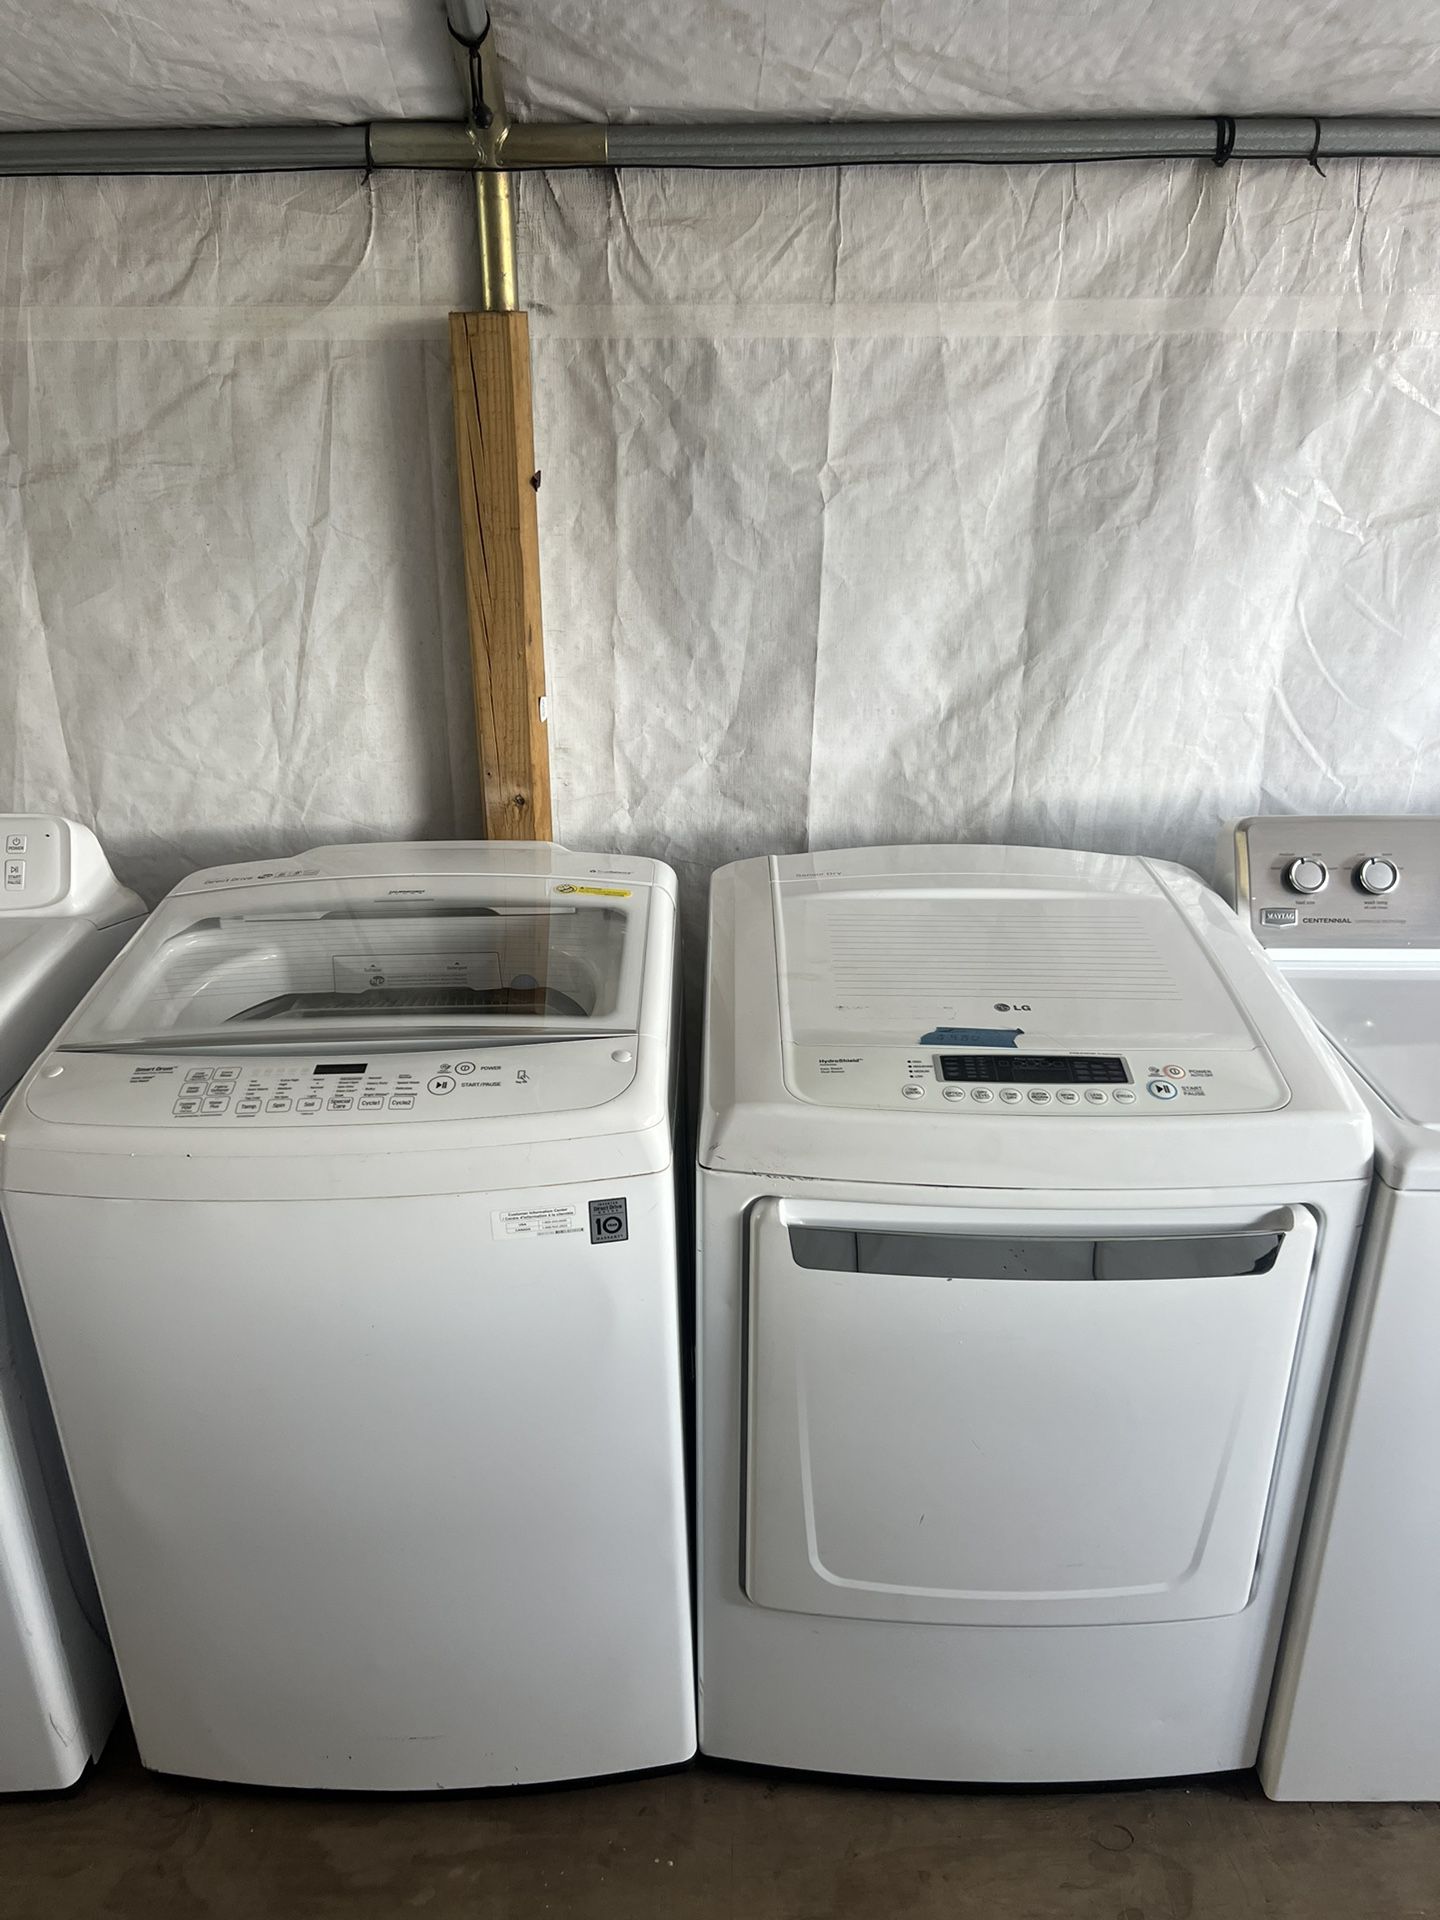 LG Washer&dryer Large Capacity Set   60 day warranty/ Located at:📍5415 Carmack Rd Tampa Fl 33610📍 